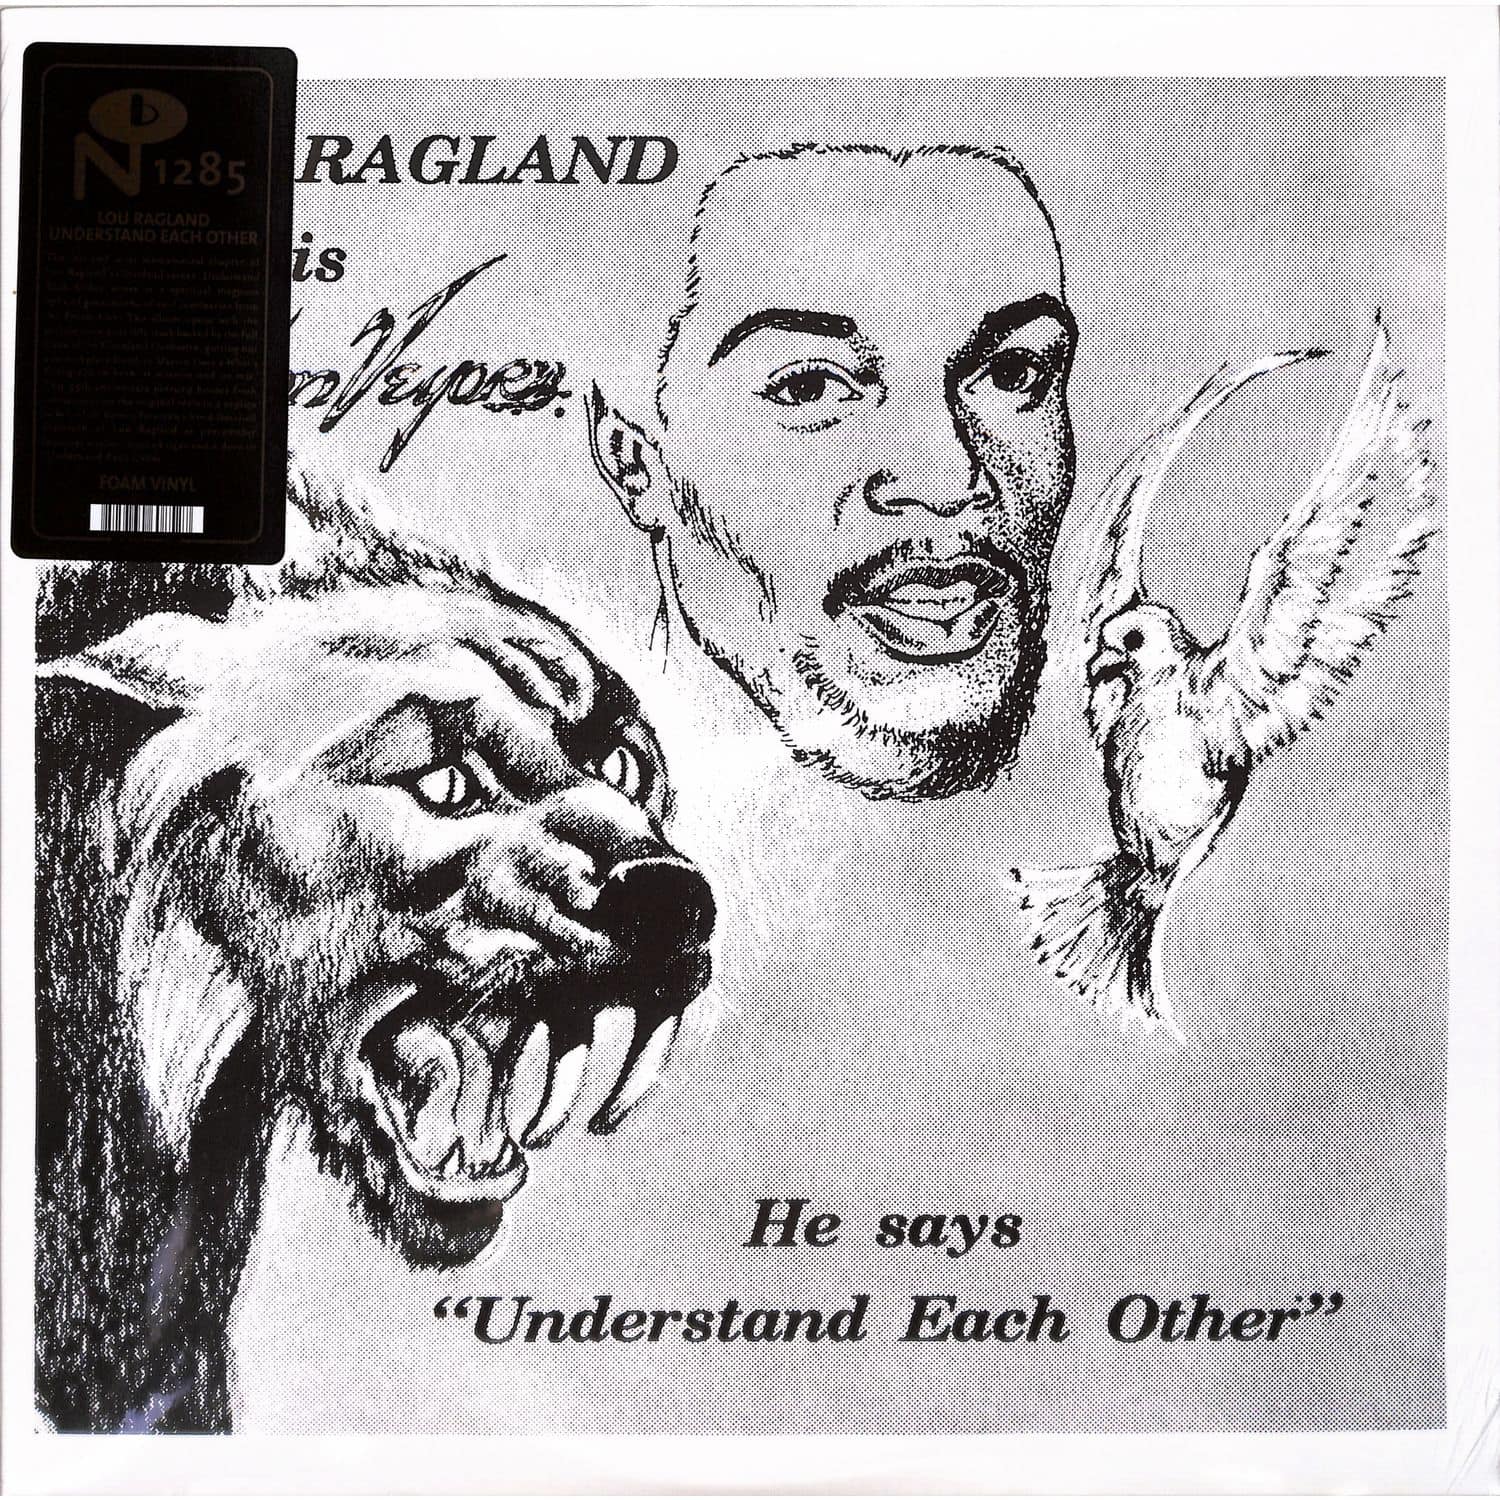 Lou Ragland - IS THE CONVEYOR - UNDERSTAND EACH OTHER 